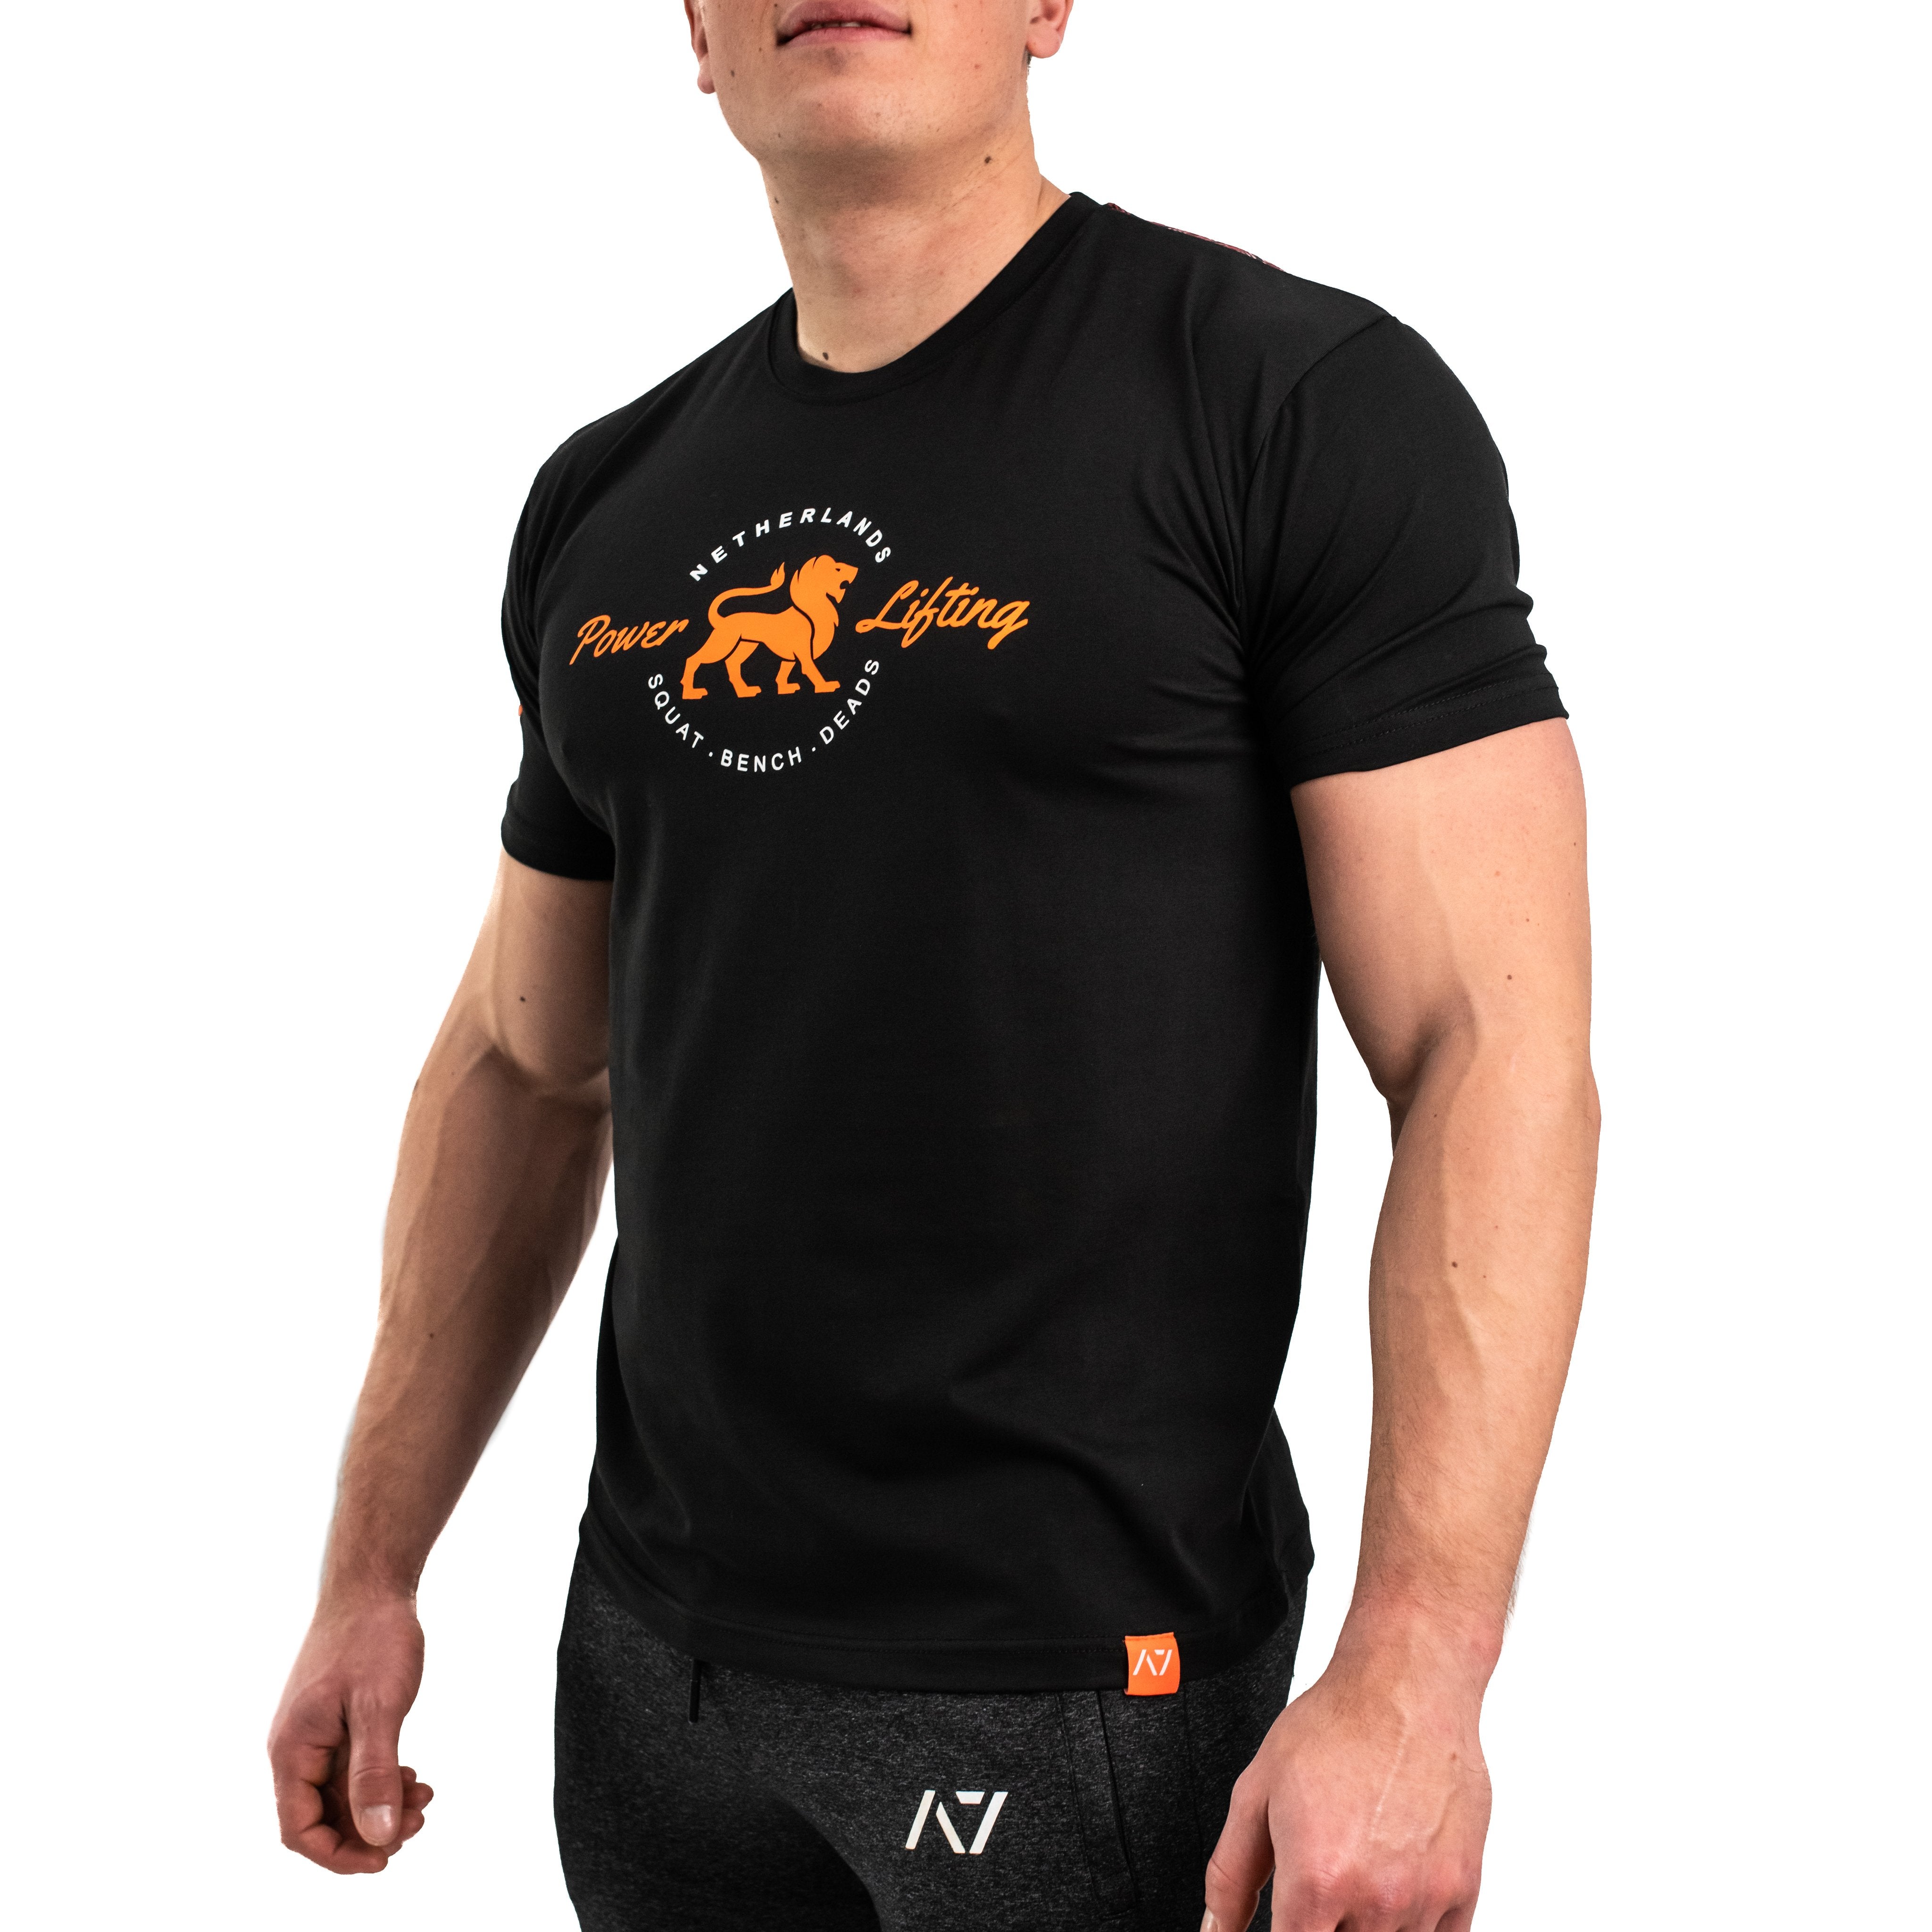 A7 Netherlands Bar Grip T-shirt is great as a squat shirt as well as for bench pressing. The perfect grip shirt. Purchase your Bar Grip tshirt in Europe and the UK from www.A7UK.com. Purchase Bar Grip Shirt Europe from A7 UK. Best Bar Grip Tshirts, shipping to UK and Europe from A7 UK. The best Powerlifting apparel for all your workouts. A7 Netherlands Bar Grip shirt is available in UK and Europe including France, Italy, Germany, Sweden and Poland.